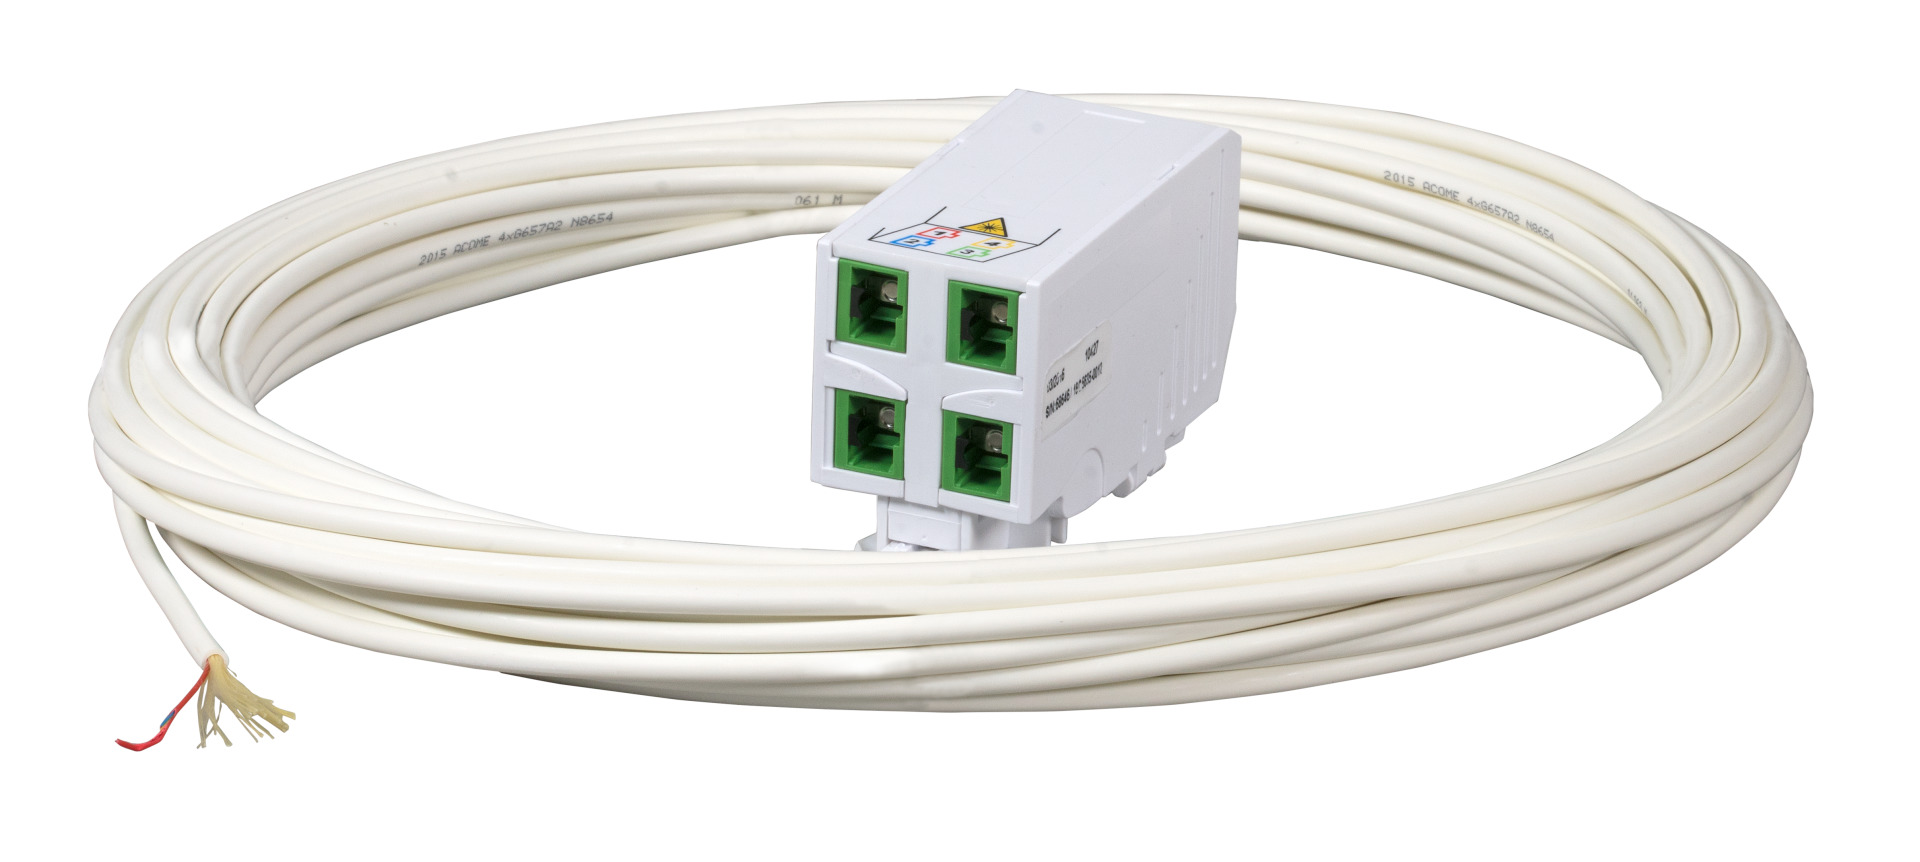 FTTH DIN RAIL Adapter,2x SC/APC adapter, Laserprotection integrated,50m DropCa